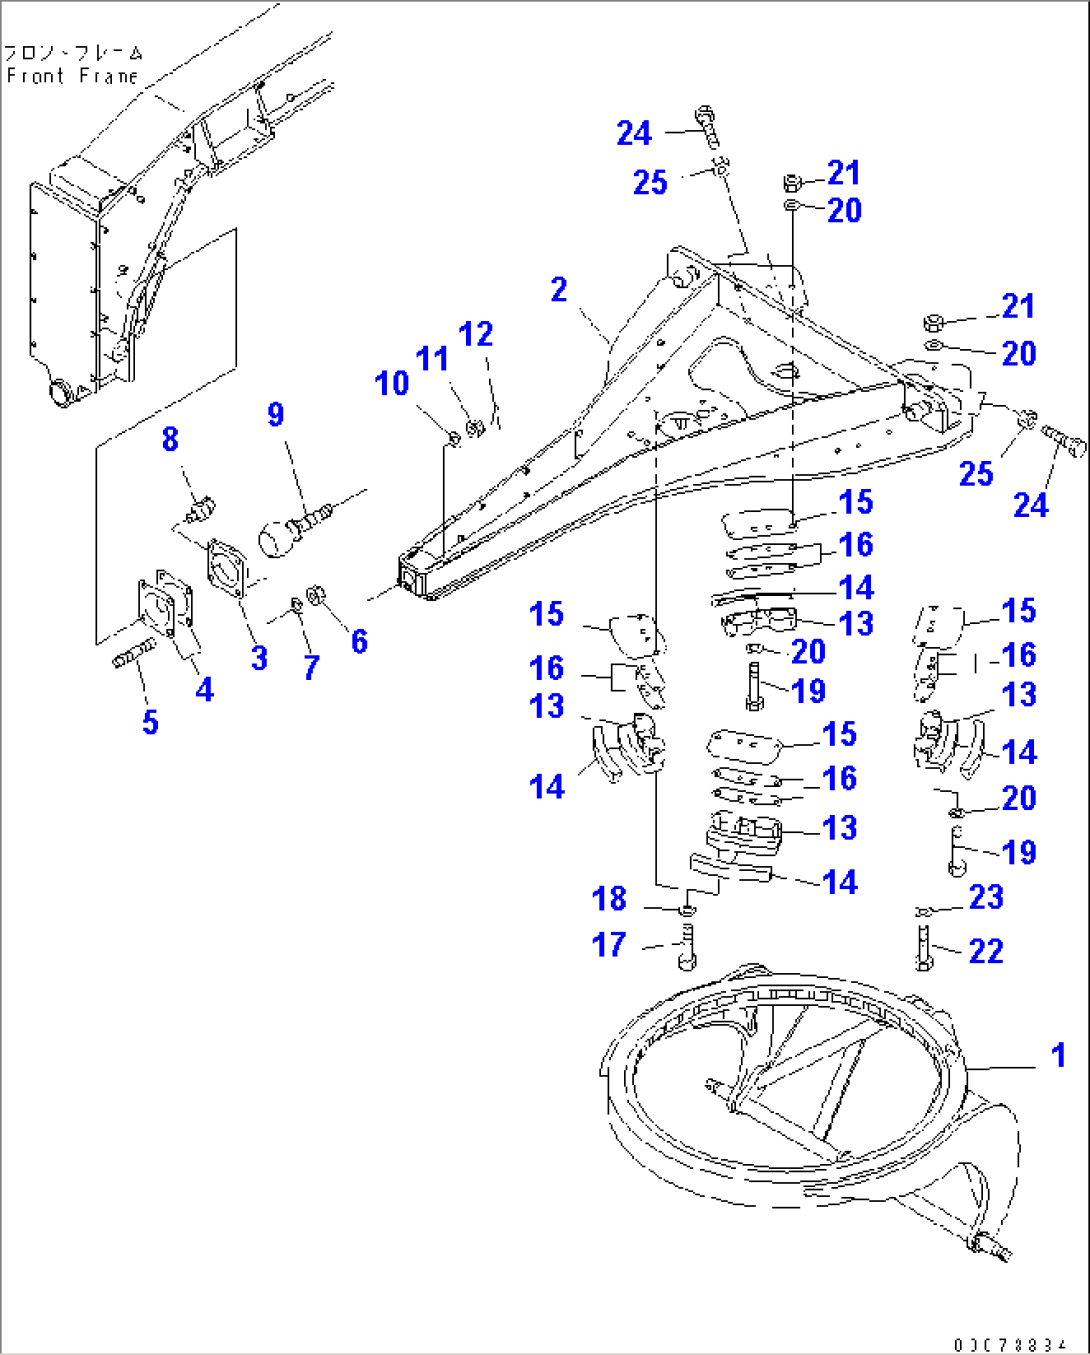 DRAWBAR AND CIRCLE SUPPORT (FOR NON IRON GUIDE PLATE) (6 CIRCLE)(#51001-)